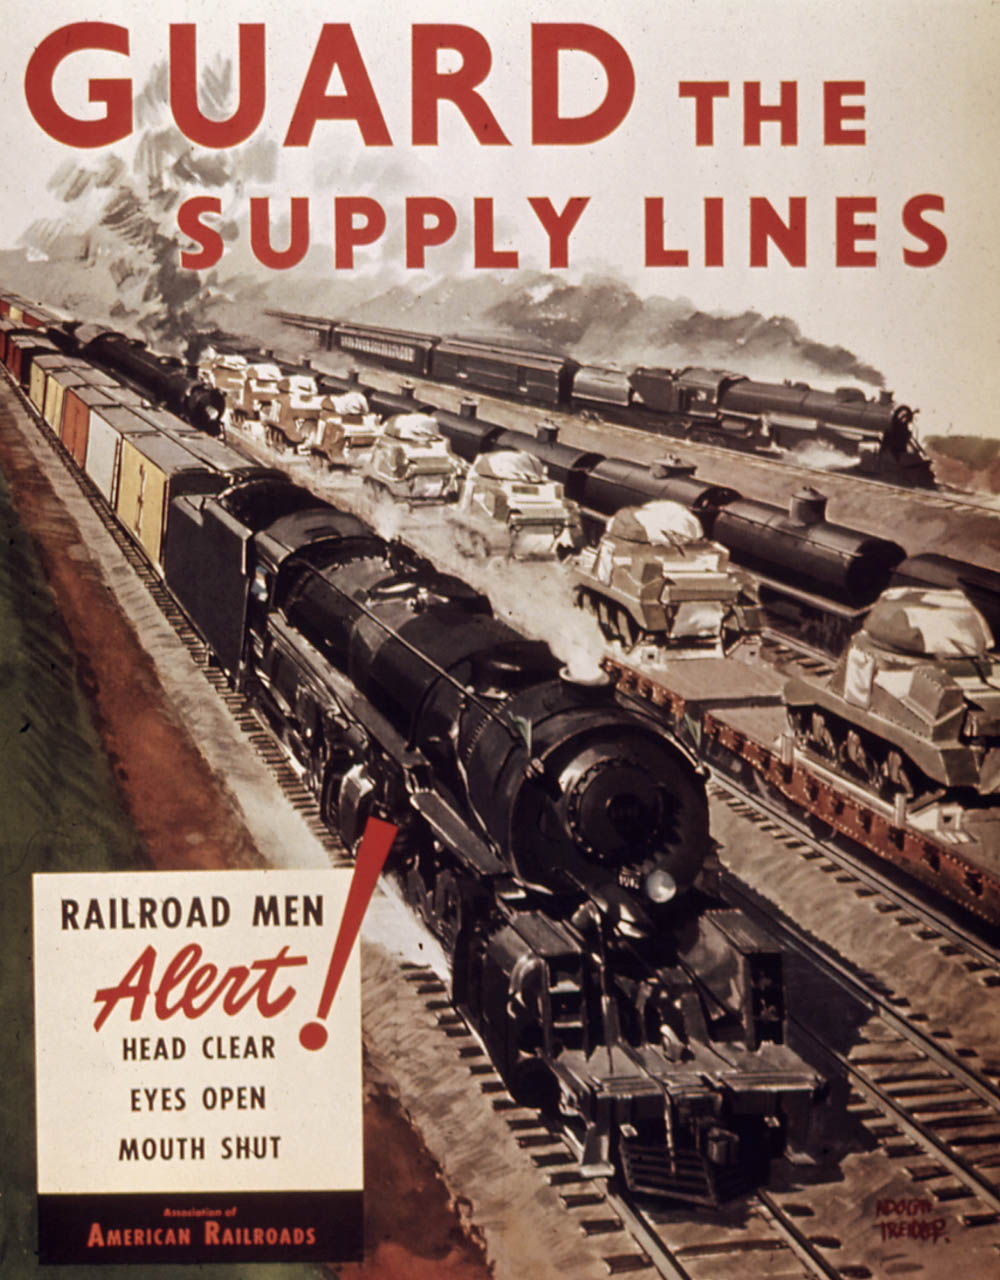 Guard the Supply Lines: Railroad Men Alert! (Office for Emergency Management, Office of War Information, National Archives and Records Administration Collection.)